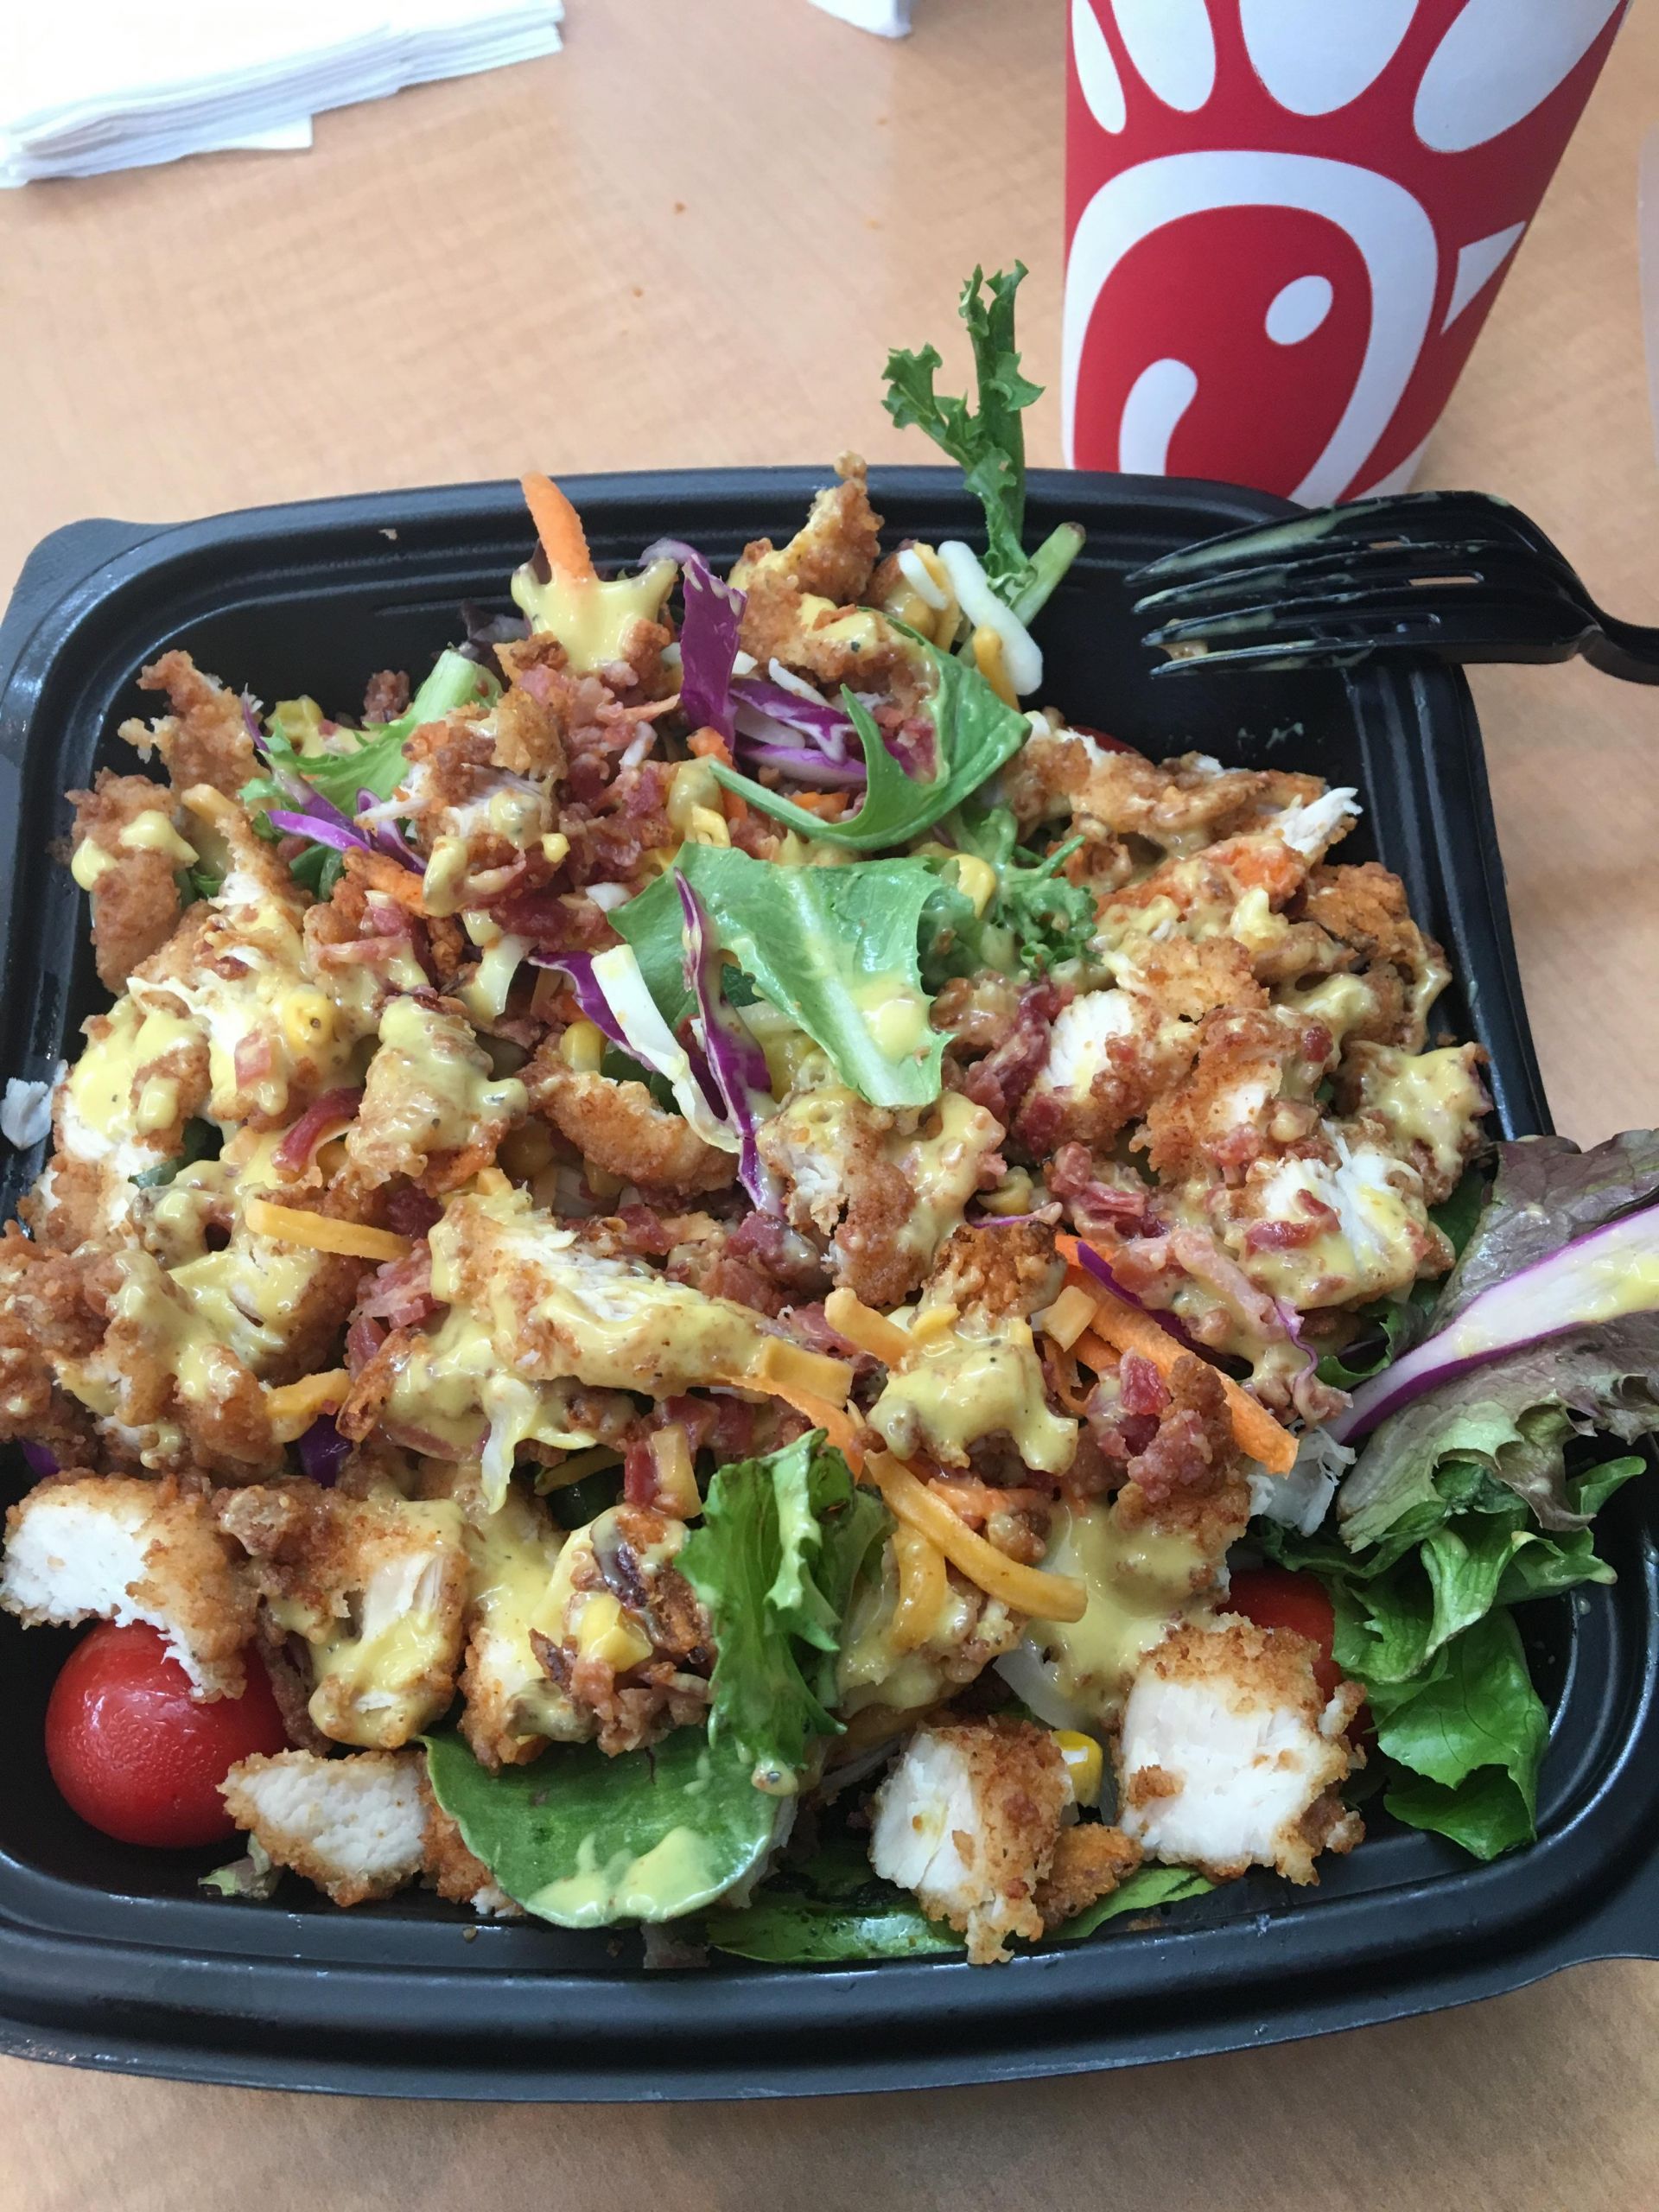 Chick Fil A Chicken Salad Awesome How Many Calories In Chick Fil A Chicken Salad Mishkanet